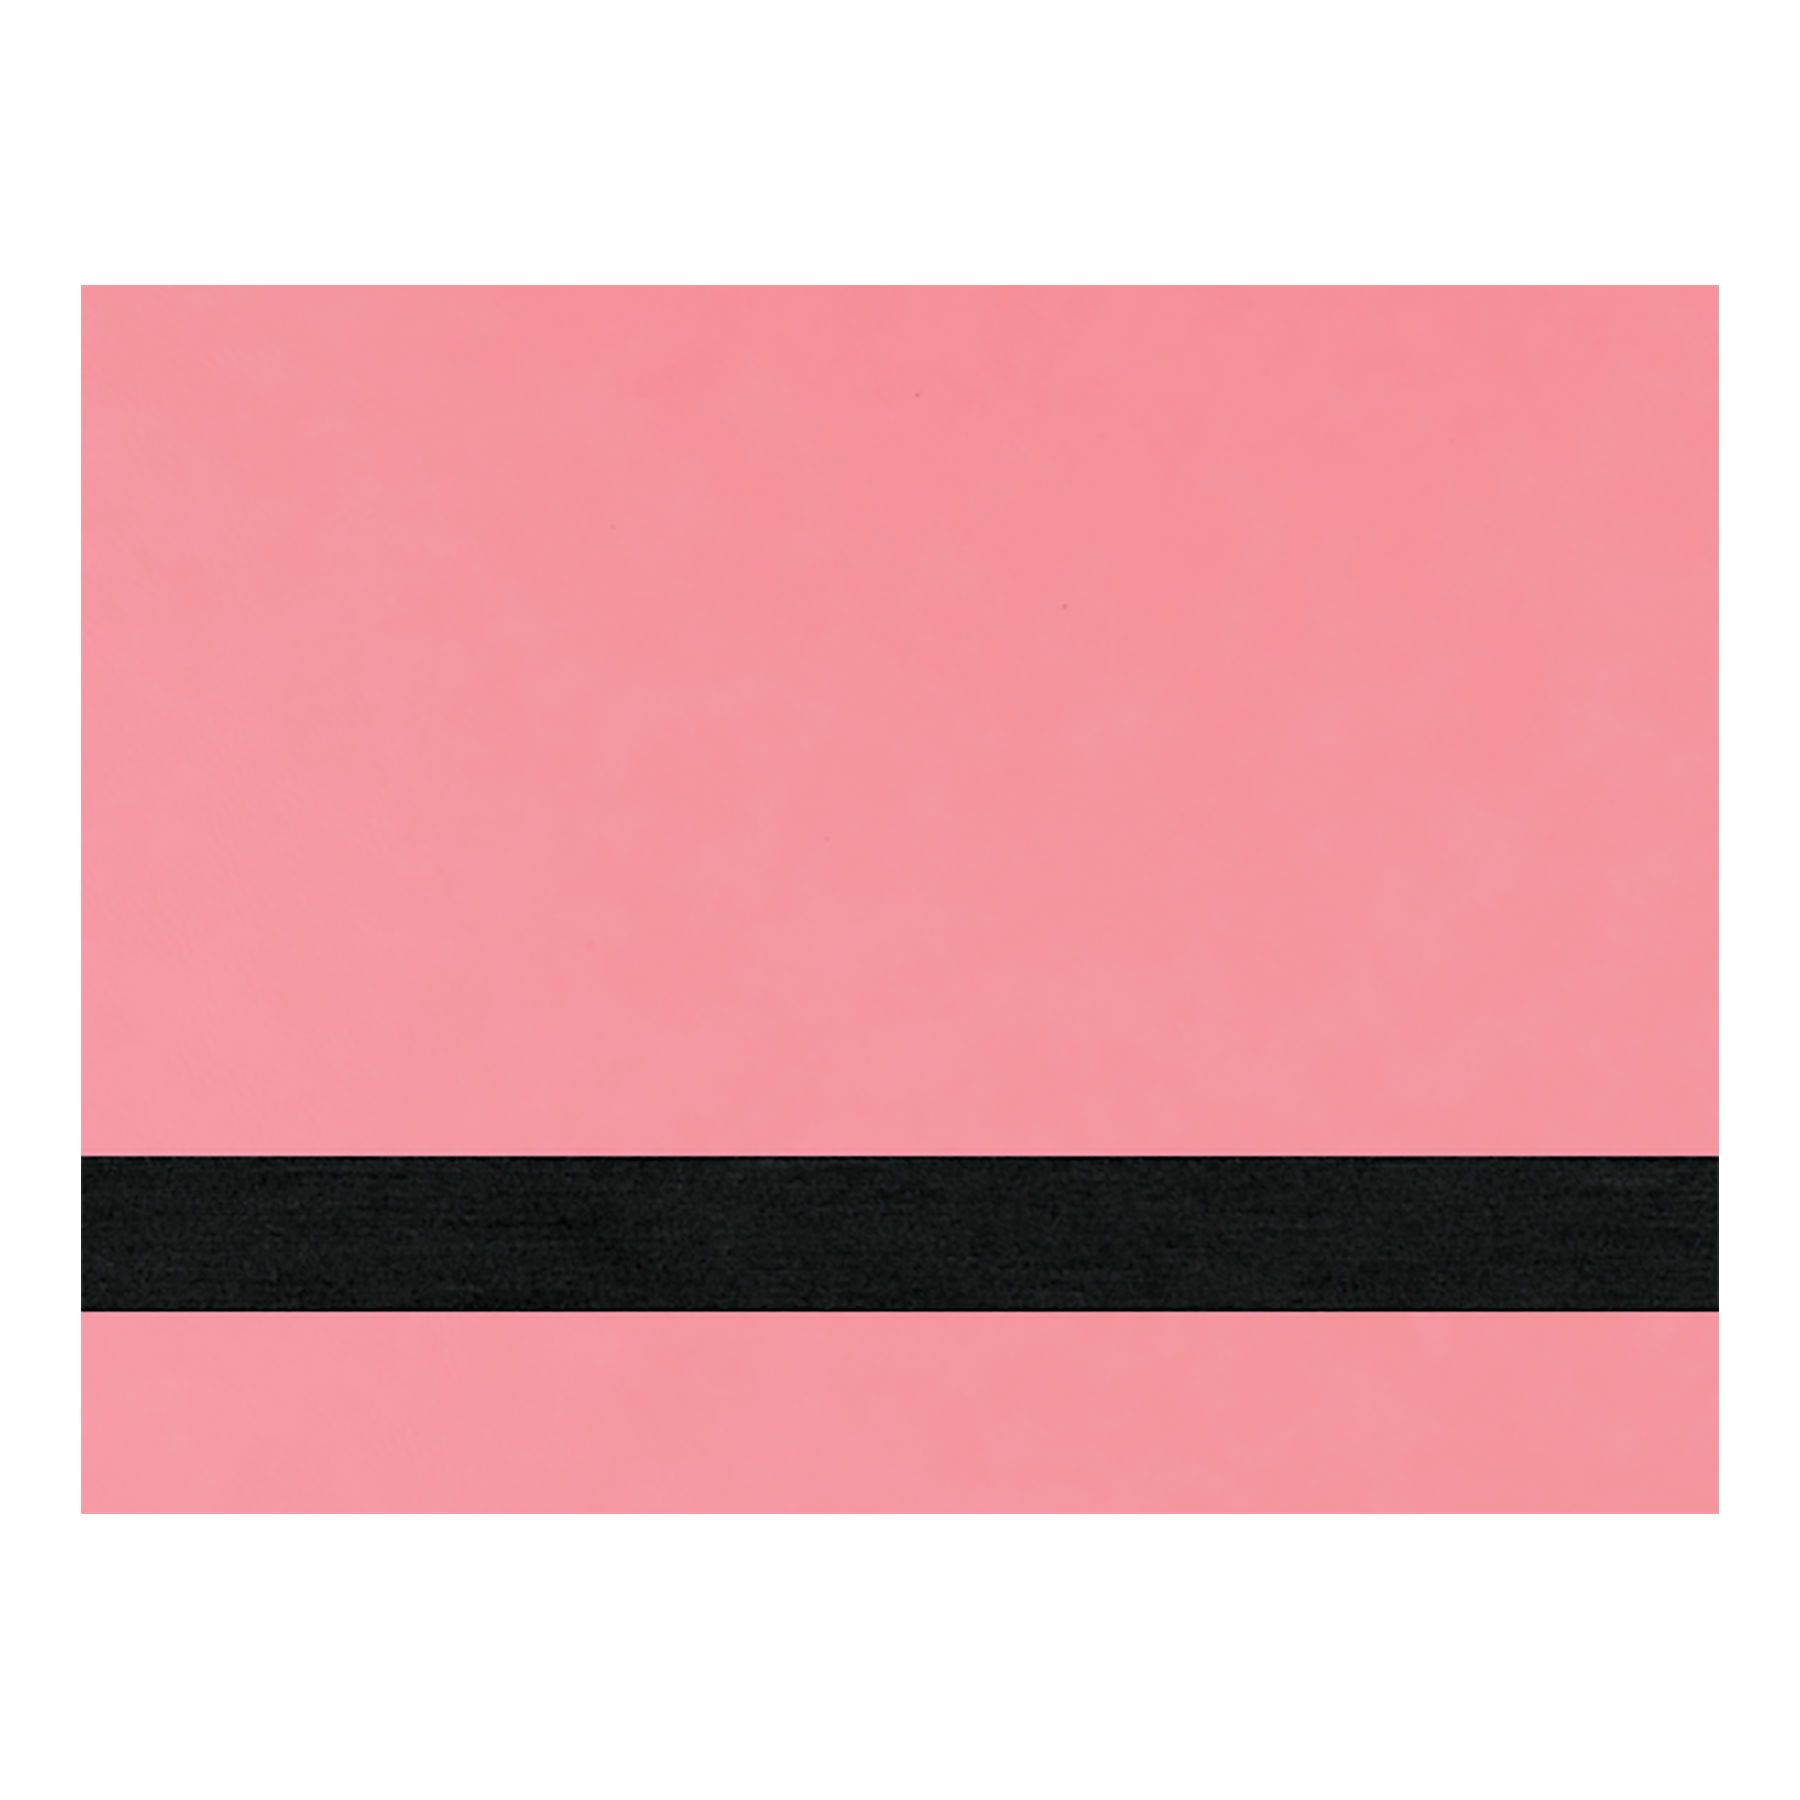 PRE-ORDER! Full Size Laserable Leatherette Sheet Stock, Rayjet Laser Engravers (Available Jan. 2022) Engraving Supplies Craftworks NW R400 (40" x 24") Pink/Black 